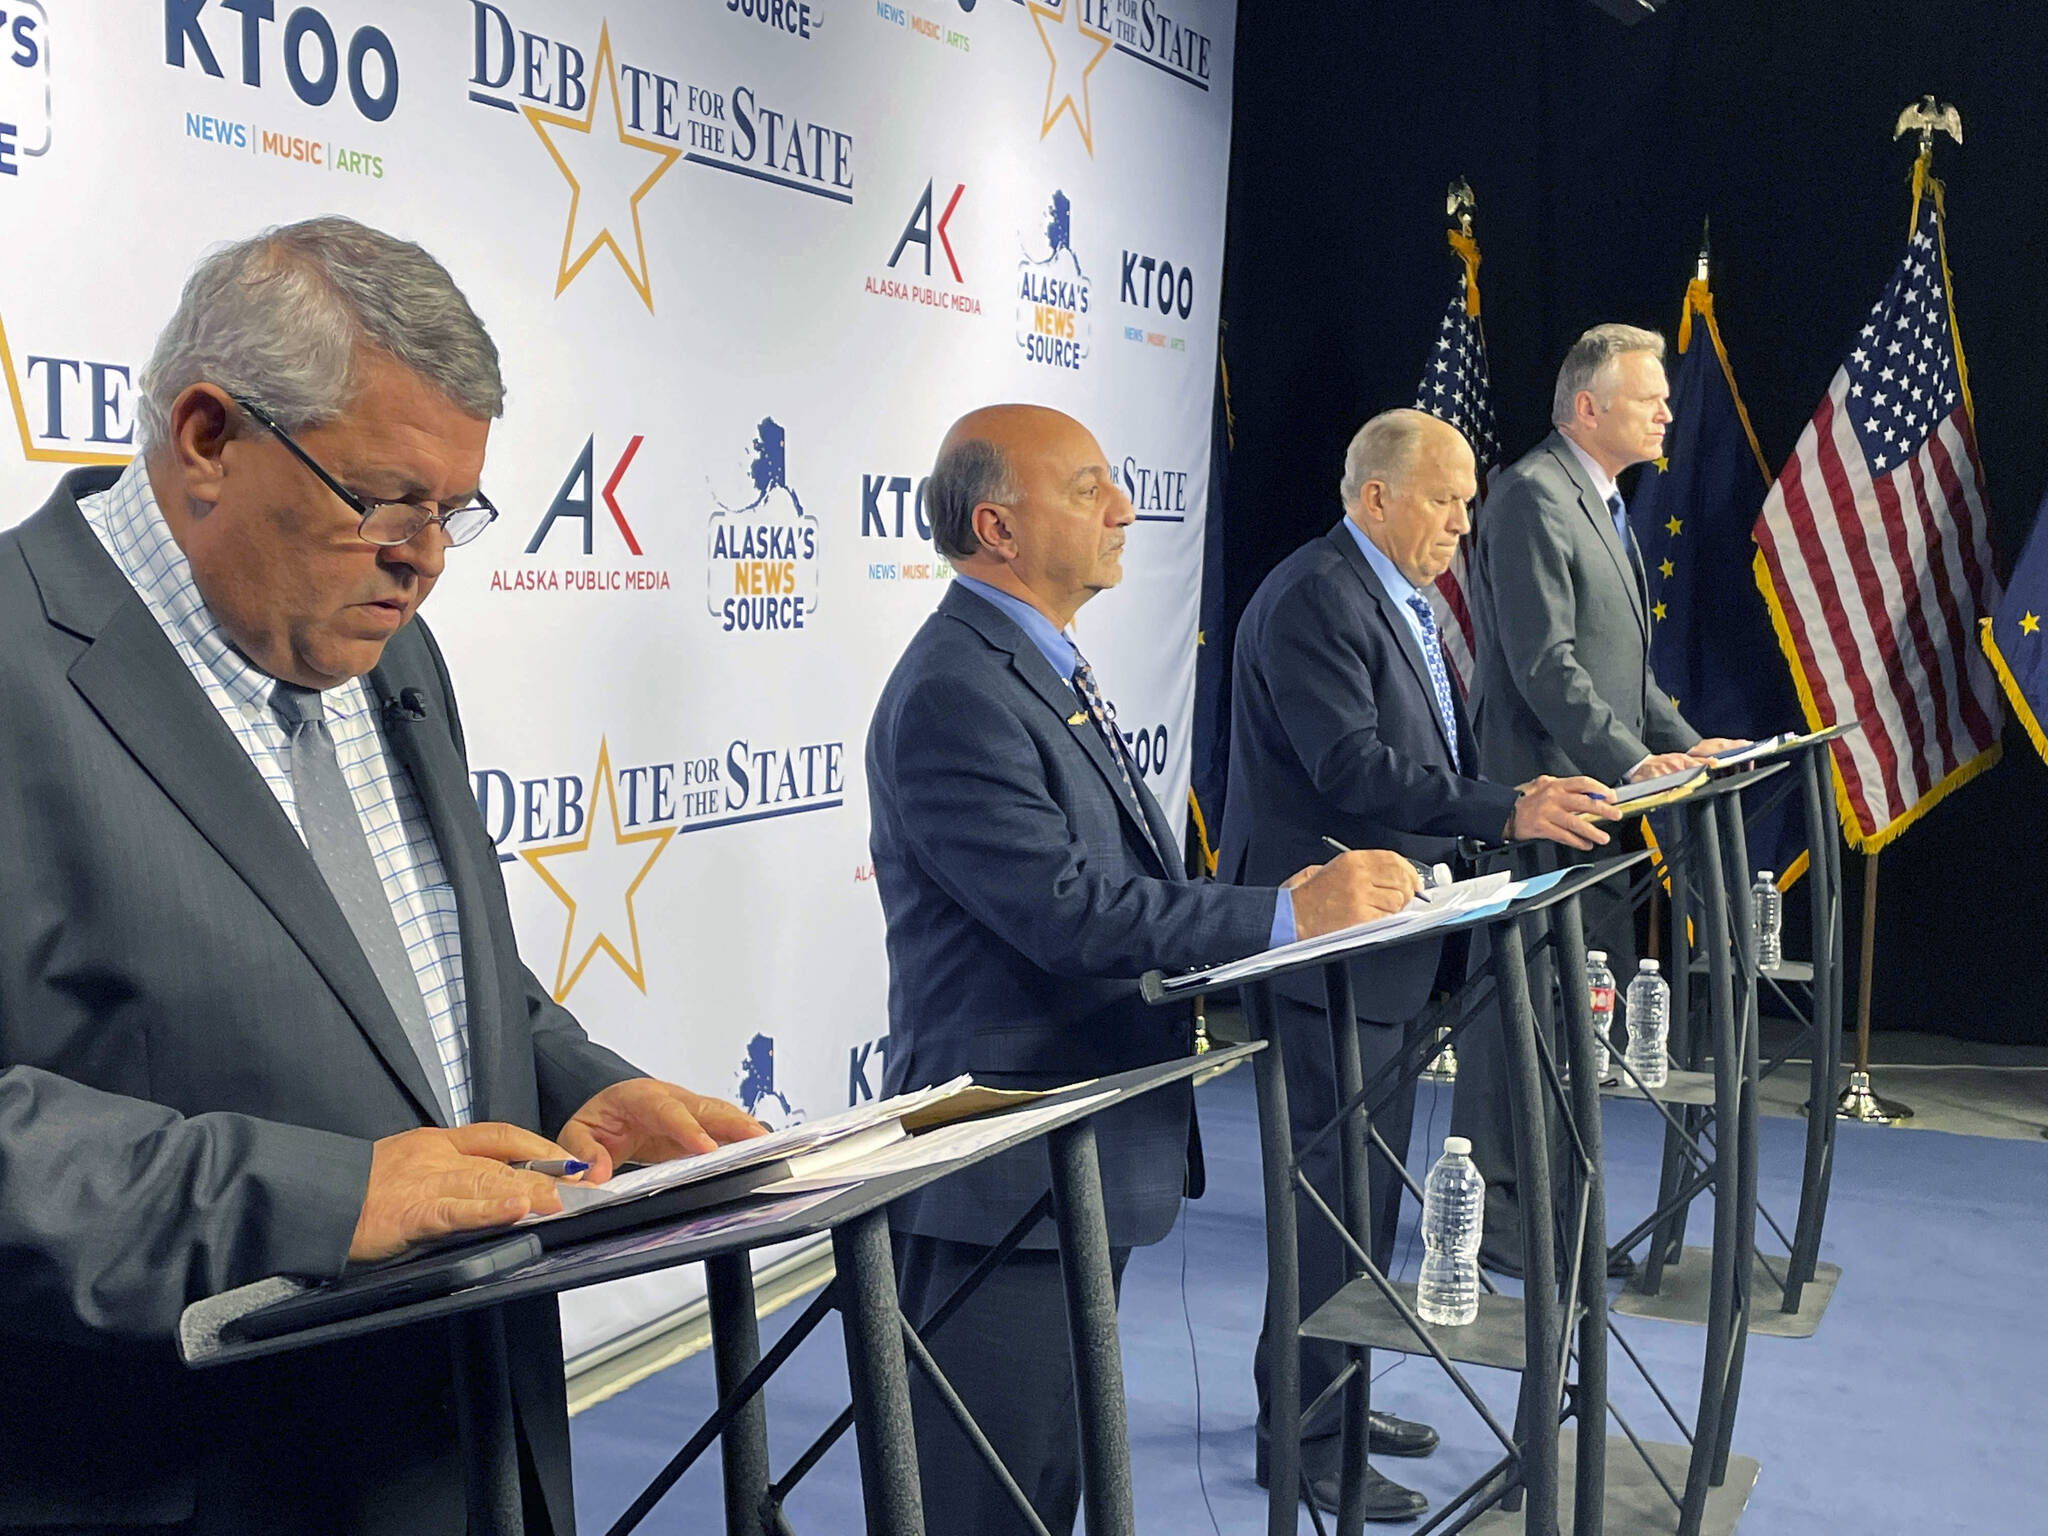 AP Photo / Mark Thiessen
The four candidates for Alaska governor are shown preparing for a televised debate Wednesday in Anchorage. From left are Republican Charlie Pierce; Democrat Les Gara; former Gov. Bill Walker, an independent; and Gov. Mike Dunleavy, a Republican.